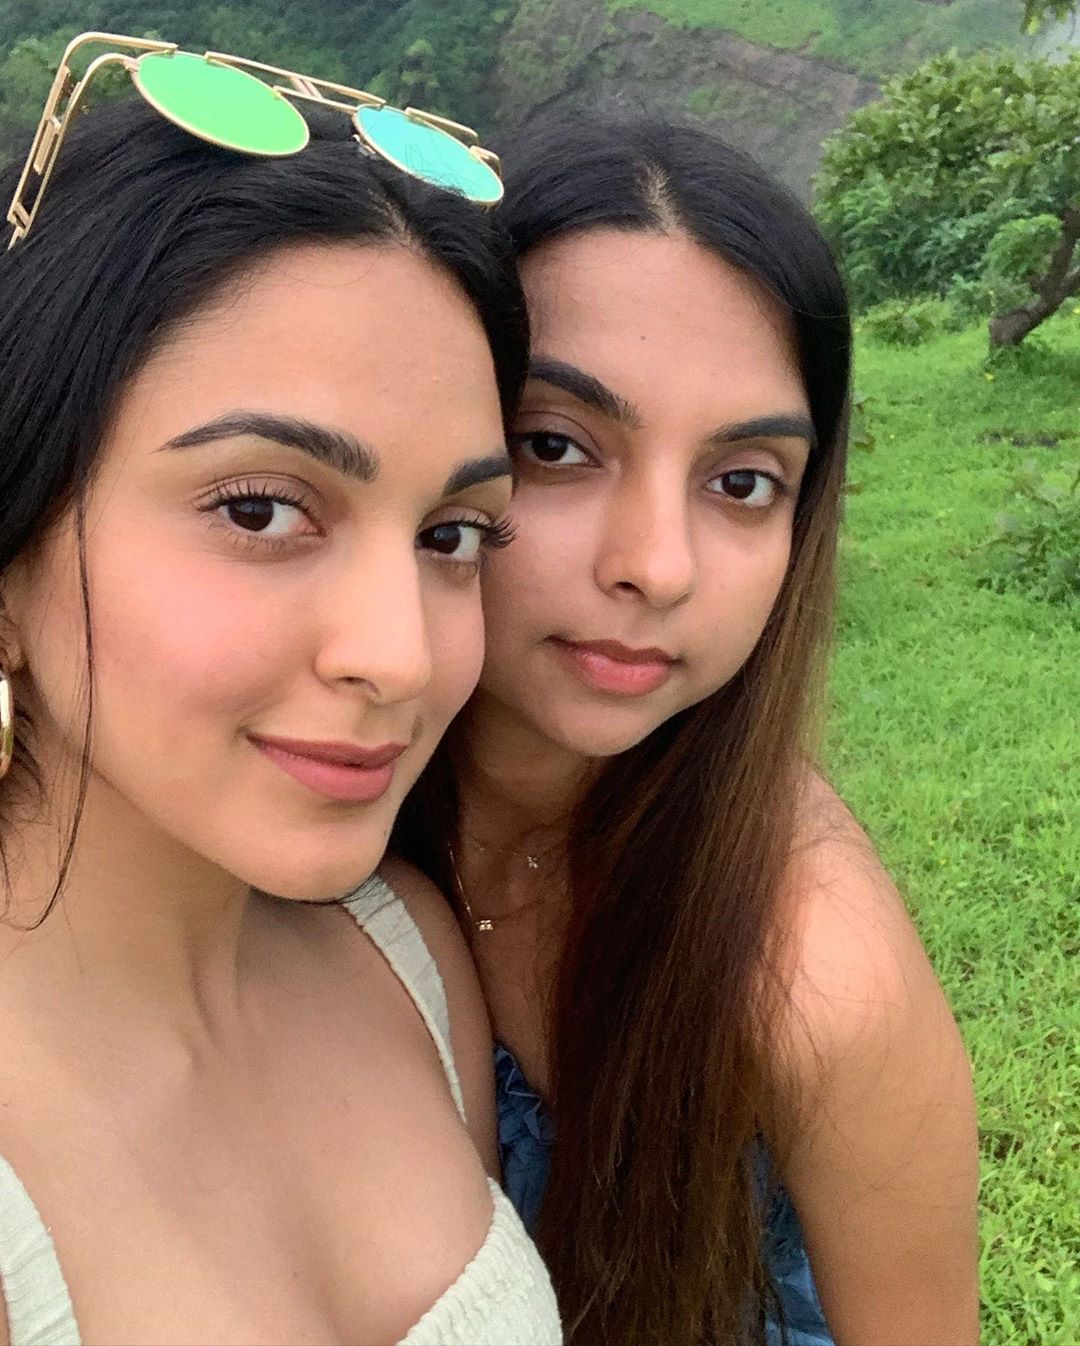 Kiara Advani shares Images with her ...